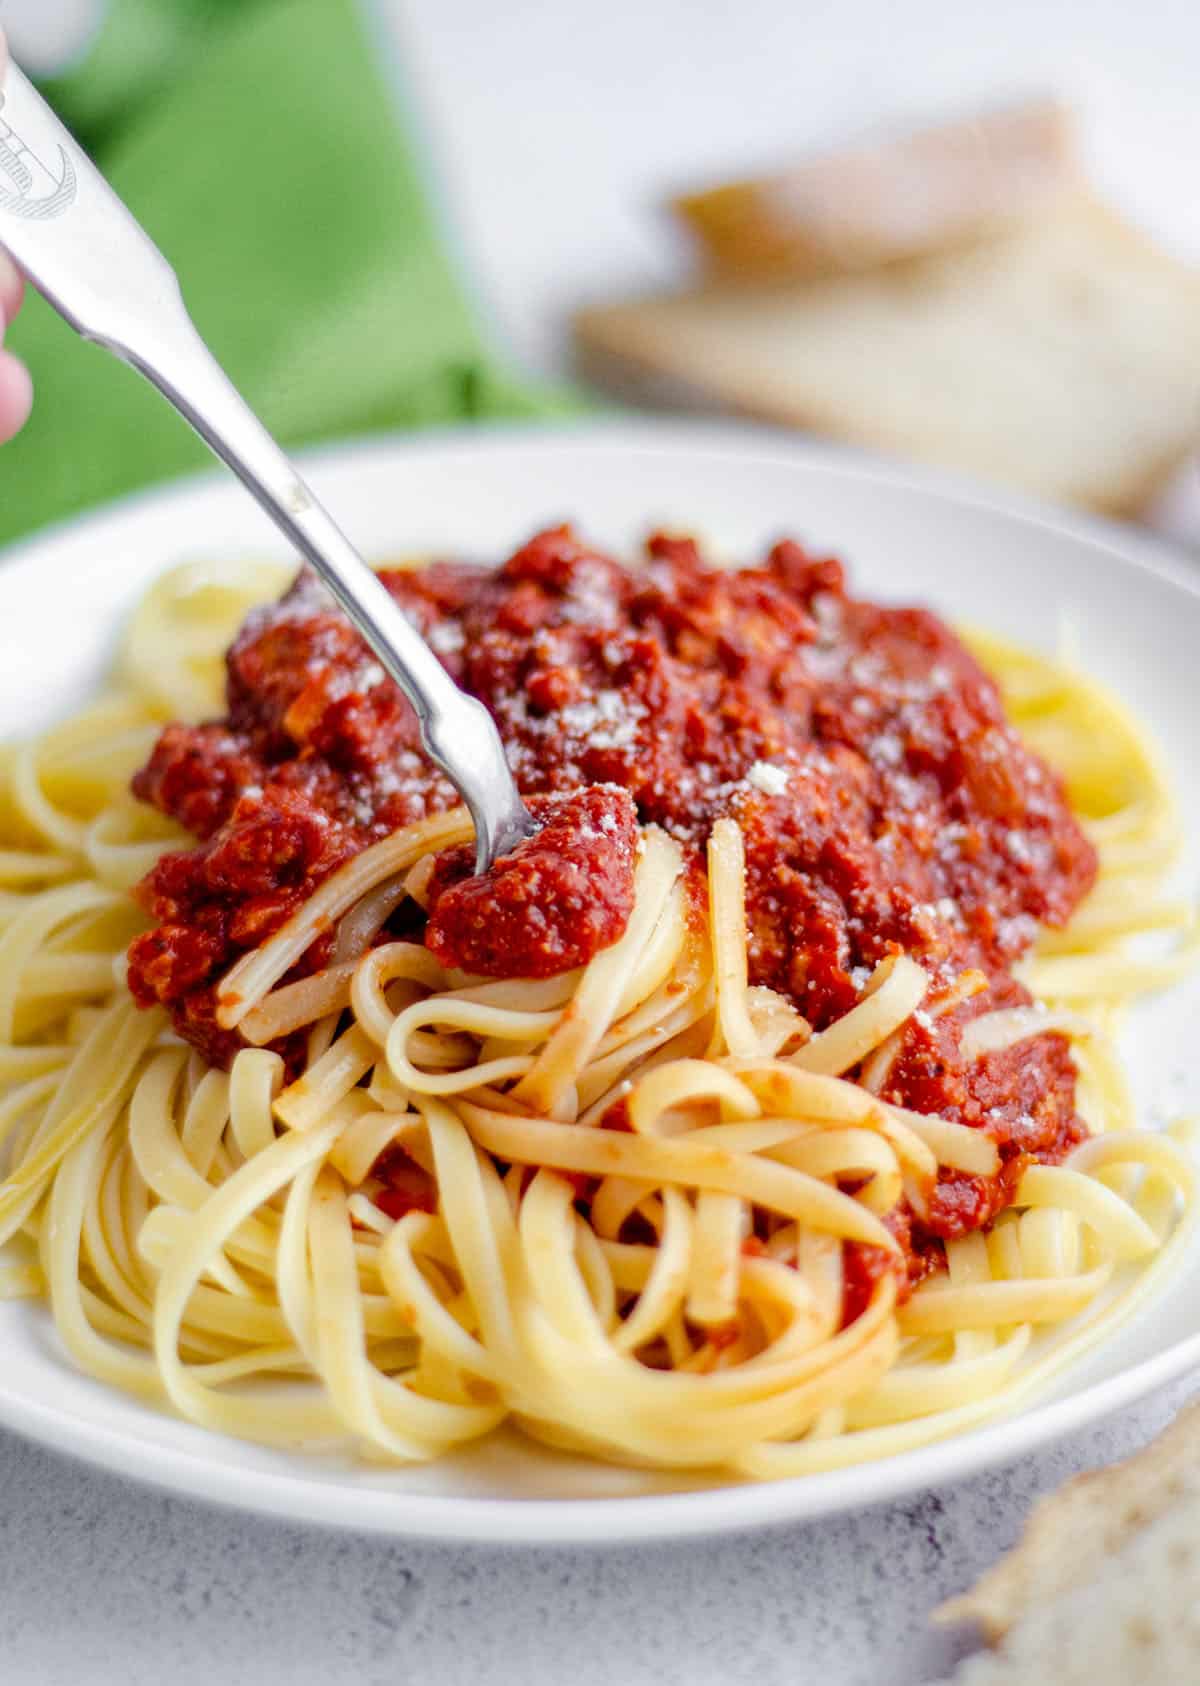 Homemade Meat Sauce: An easy homemade pasta sauce made with five simple ingredients. This recipe has been in my family for over a century and is a go-to for pasta dishes and lasagna or over vegetables or eggs.